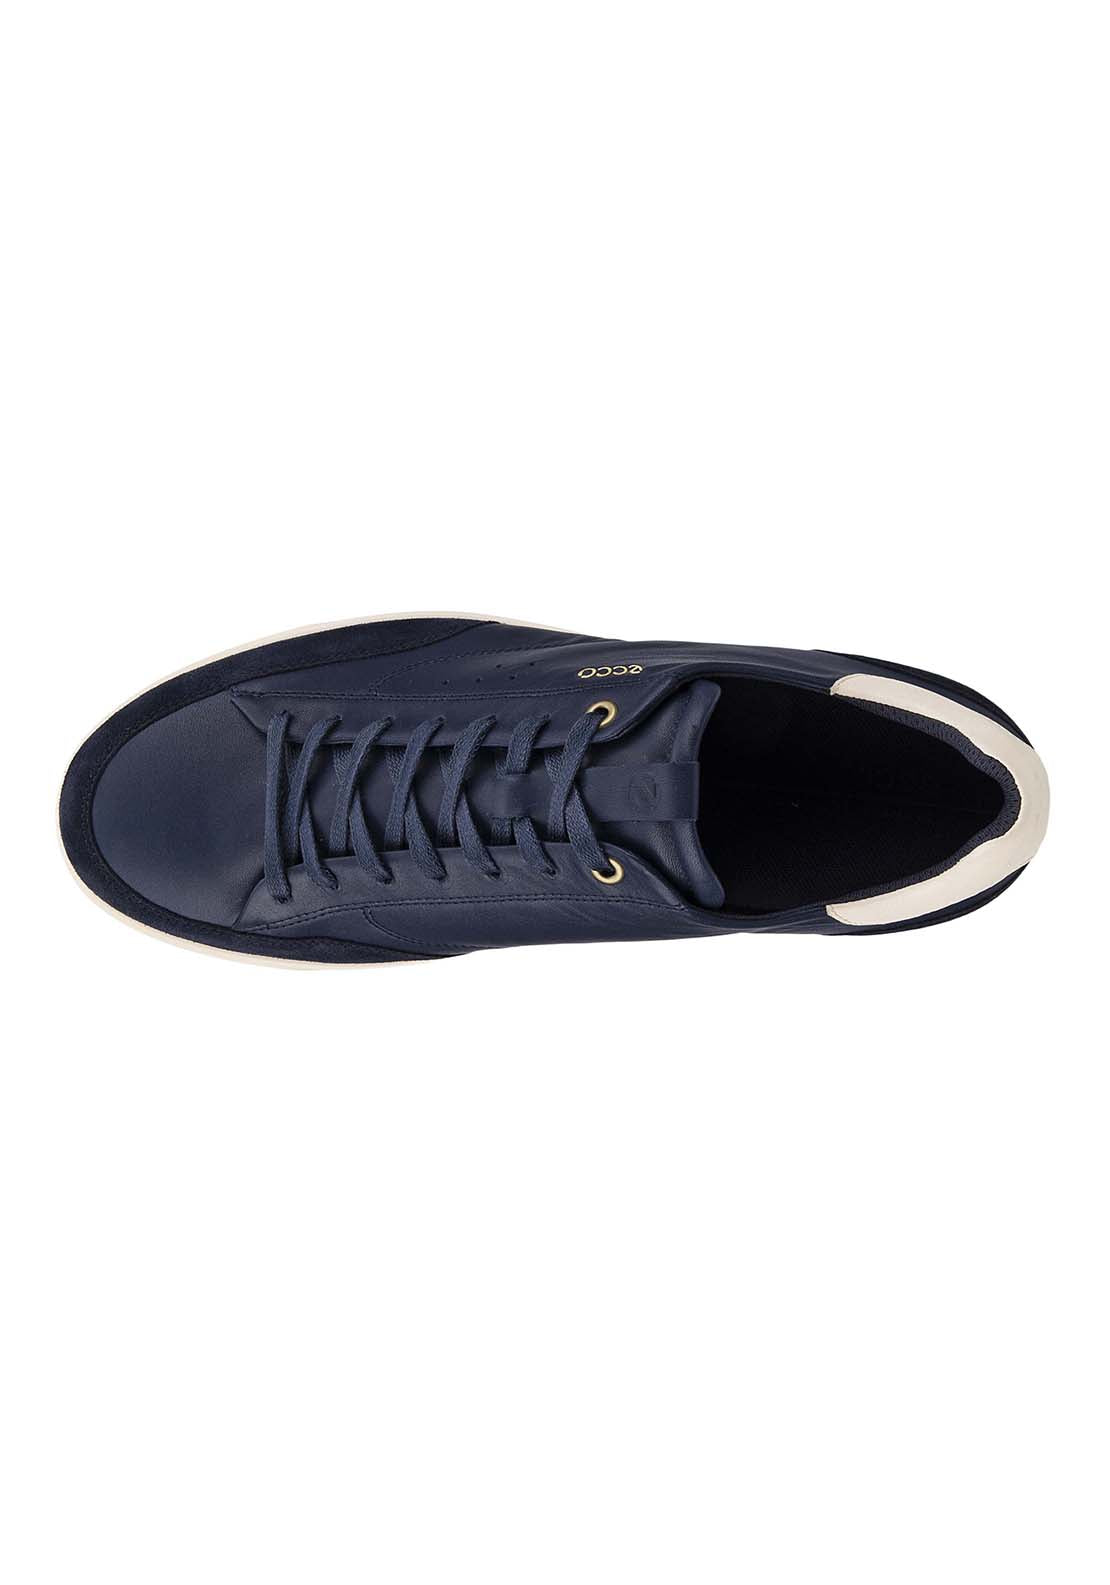 Ecco Street Lite Casual Lace 2 Shaws Department Stores